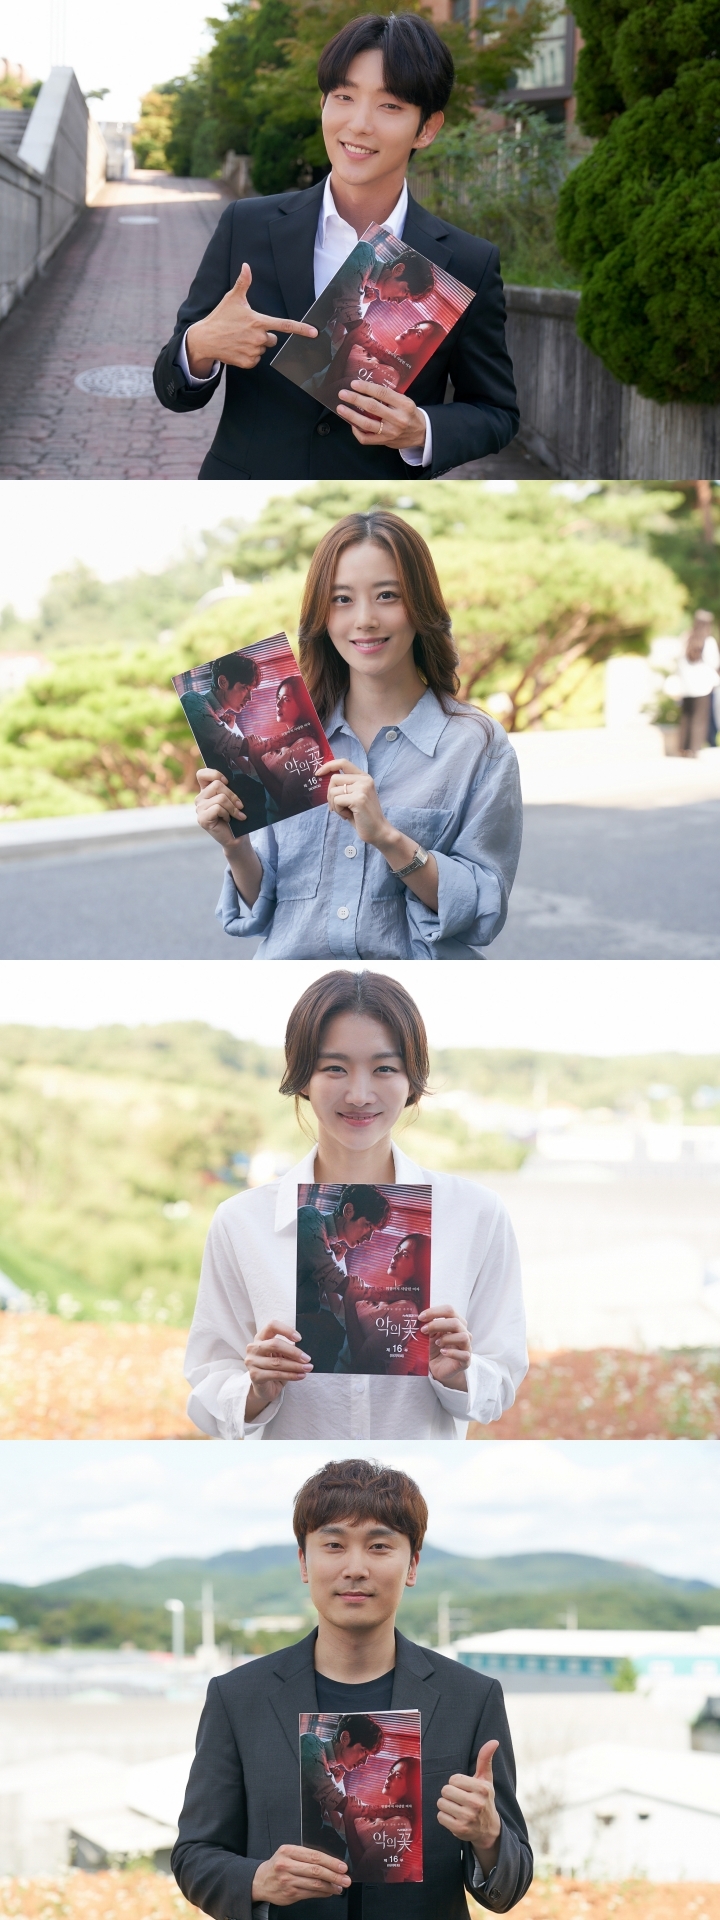 Seoul = = Actor Lee Joon-gi, Moon Chae-won, Jang Hee-jin, and Seo Hyeon-woo expressed their feelings ahead of the TVN Wednesday-Thursday evening drama Flower of Evil End.On the 23rd, TVN Wednesday-Thursday evening drama Flower of Evil (playplayed by Yoo Jung-hee/directed by Kim Cheol-gyu/production studio Dragon, Monster Union) was ending, while Lee Joon-gi Moon Chae-won Jang Hee-jin Seo Hyeon-woos four leading characters conveyed their end testimony.Lee Joon-gi of Do Hyun-soo said, The flower of evil that has been running for the past seven months has been completed. In fact, when I first started, I felt a lot of pressure that I could feel difficult and do well. I think it was well finished thanks to the bishop, the artist, the staff and my colleagues. I am really grateful that there are viewers who enjoyed and supported the flower of evil together, so I was able to complete it with more power. Every work did, but the flower of evil seems to remain a long time.I would like to express my sincere gratitude and love to all those who love Flower of Evil and Do Hyun-soo.Moon Chae-won, who wrote another life character as a car support, said, I do not yet realize that the flower of evil, which spent three seasons together from warm spring to cool autumn, is ahead of End. I think it will be remembered to me as a more rewarding work than ever since I was filming my best.I sincerely thank the viewers who loved the drama, he said. I wanted to express the character and feelings of Cha Ji-won as true as possible, so there were moments that were difficult and difficult, and I was able to overcome well thanks to the love that viewers sent.It was a really happy time to meet all the staff members including Kim Chul-kyu, Yoo Jung-hee, and fellow actors with good works, he added. I would like to ask for your interest and expectation for the last flower of evil.I was happy to have an unexpected big love, said Jang Hee-jin of Dohaesu Station. I would like to express my sincere gratitude to all the viewers who made me and the audience who have been begging me.He added, Please join us until the end of the final session.Seo Hyeon-woo, who plays the role of Kim Moo-jin, also said, Thanks to the hot love and interest of the viewers, I seem to have been able to keep my staff and safety and finish well. I hope that the viewers will be able to work hard and continue to rest for a while in the difficult situation of .On the other hand, the final page of the high-density emotional tracking drama of the two people facing the truth that they want to ignore, Baek Hee-sung (Do Hyun-soo), the man who played even love, and his wife, Cha Ji-won, who started to doubt his reality, can be seen at the final meeting at 10:50 pm on the 23rd.